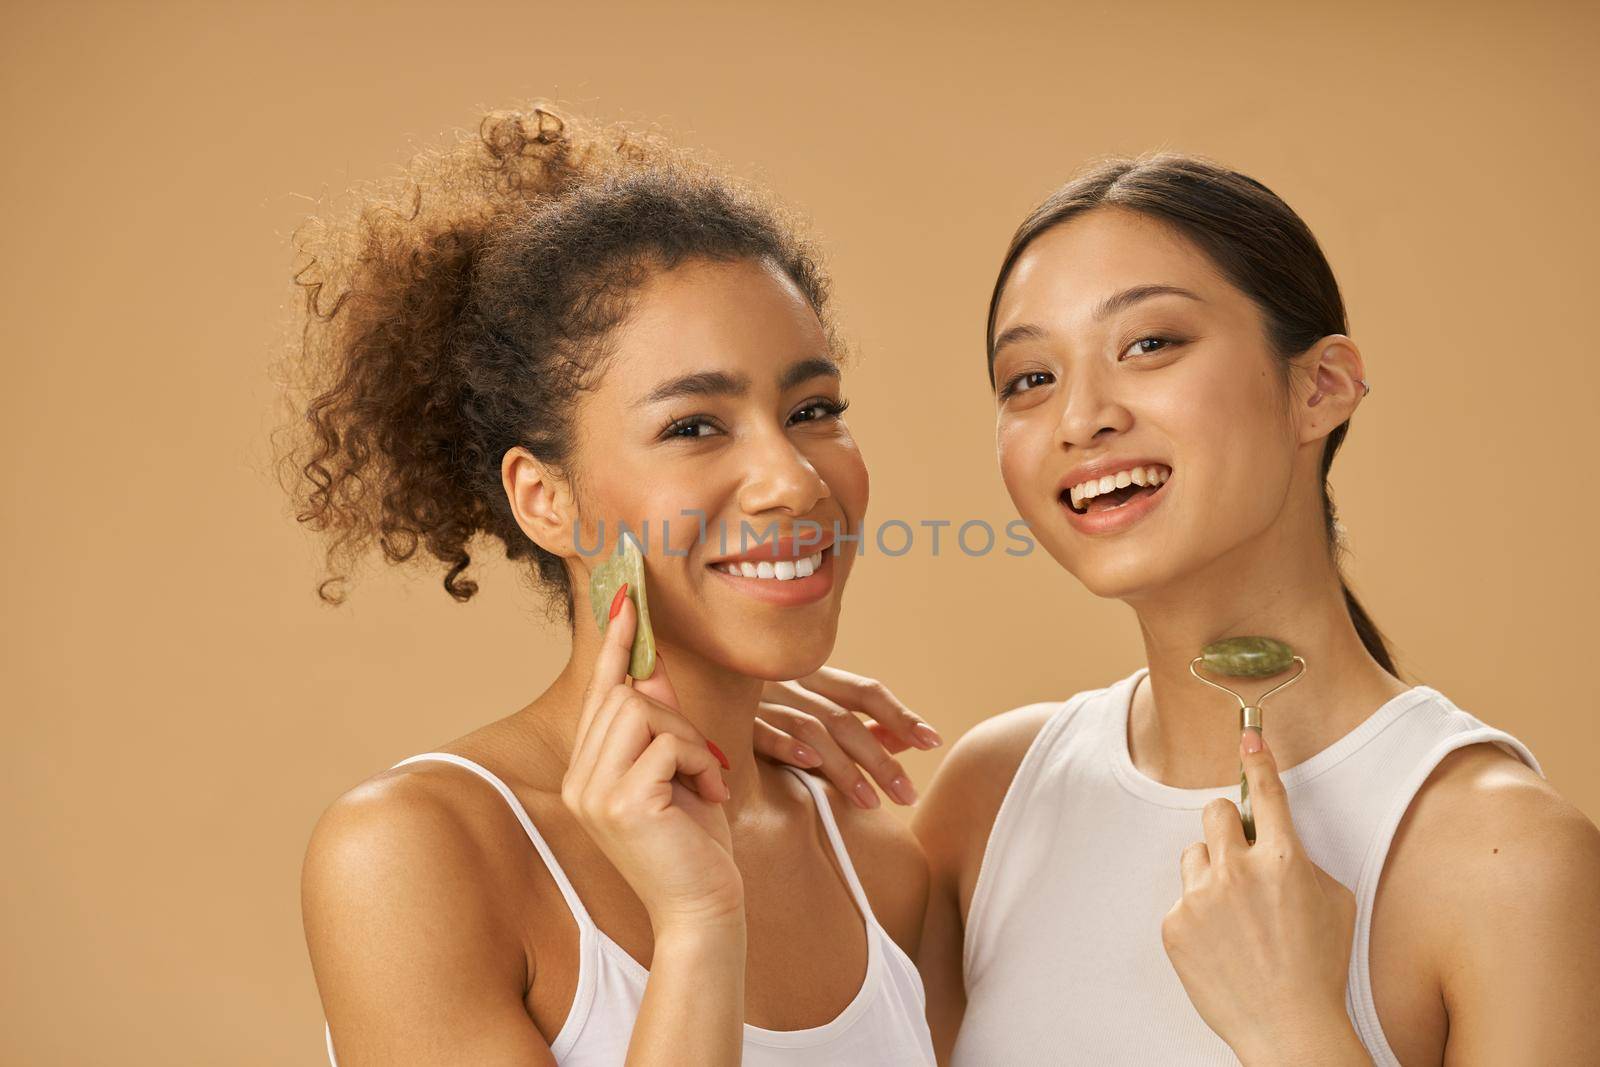 Pretty young women smiling at camera, using jade roller and facial gua sha while posing together isolated over beige background. Skincare concept